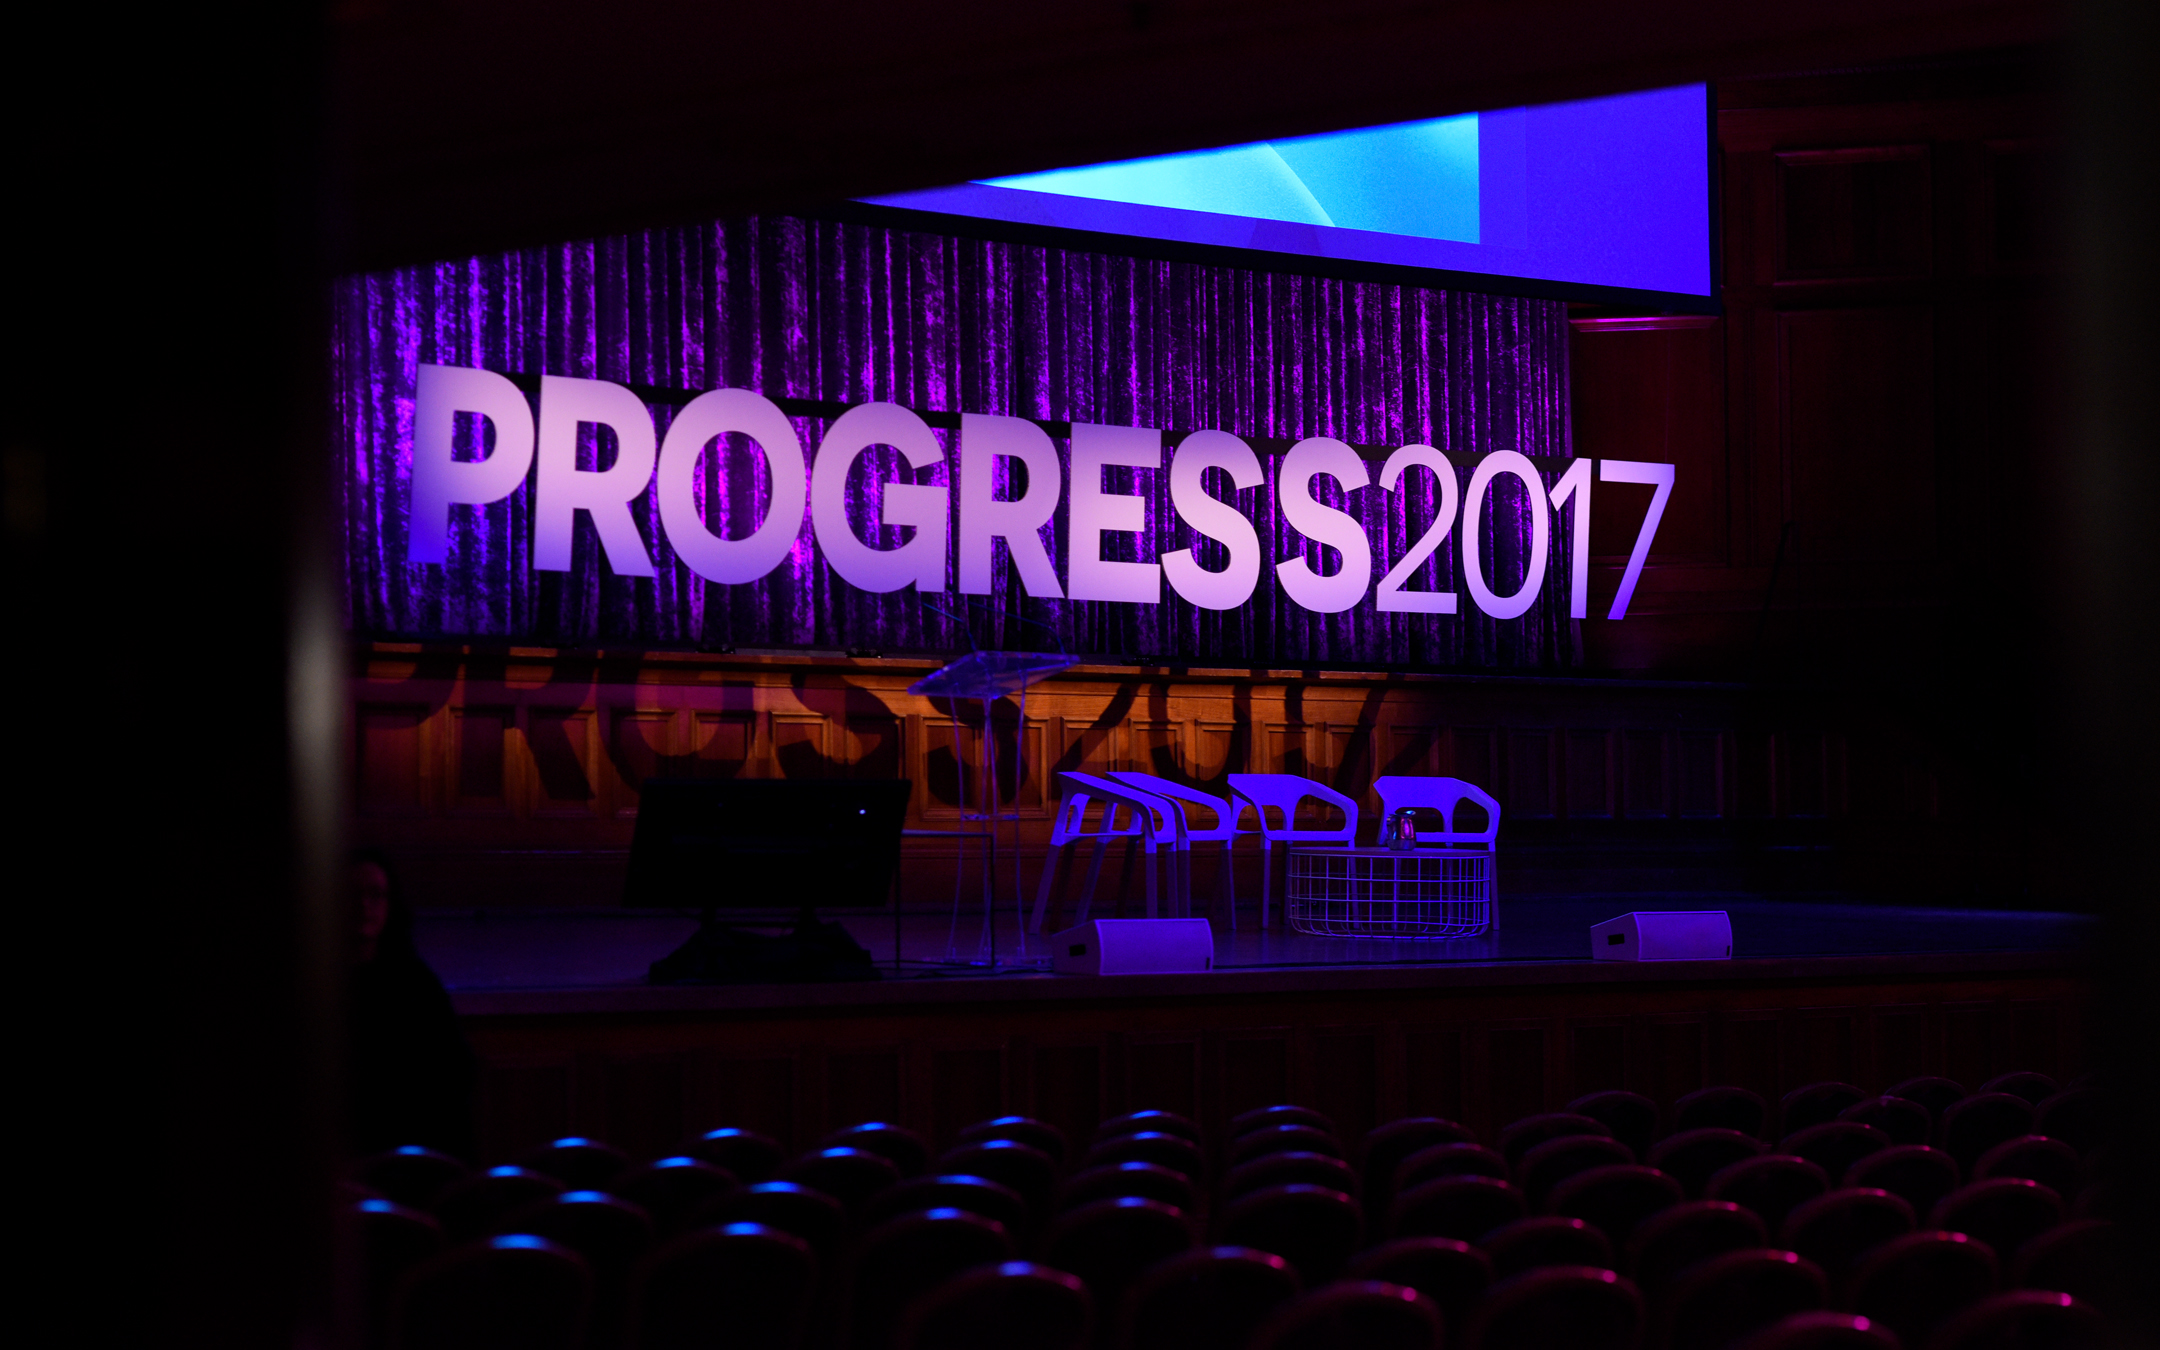 Almost ready for Progress 2017